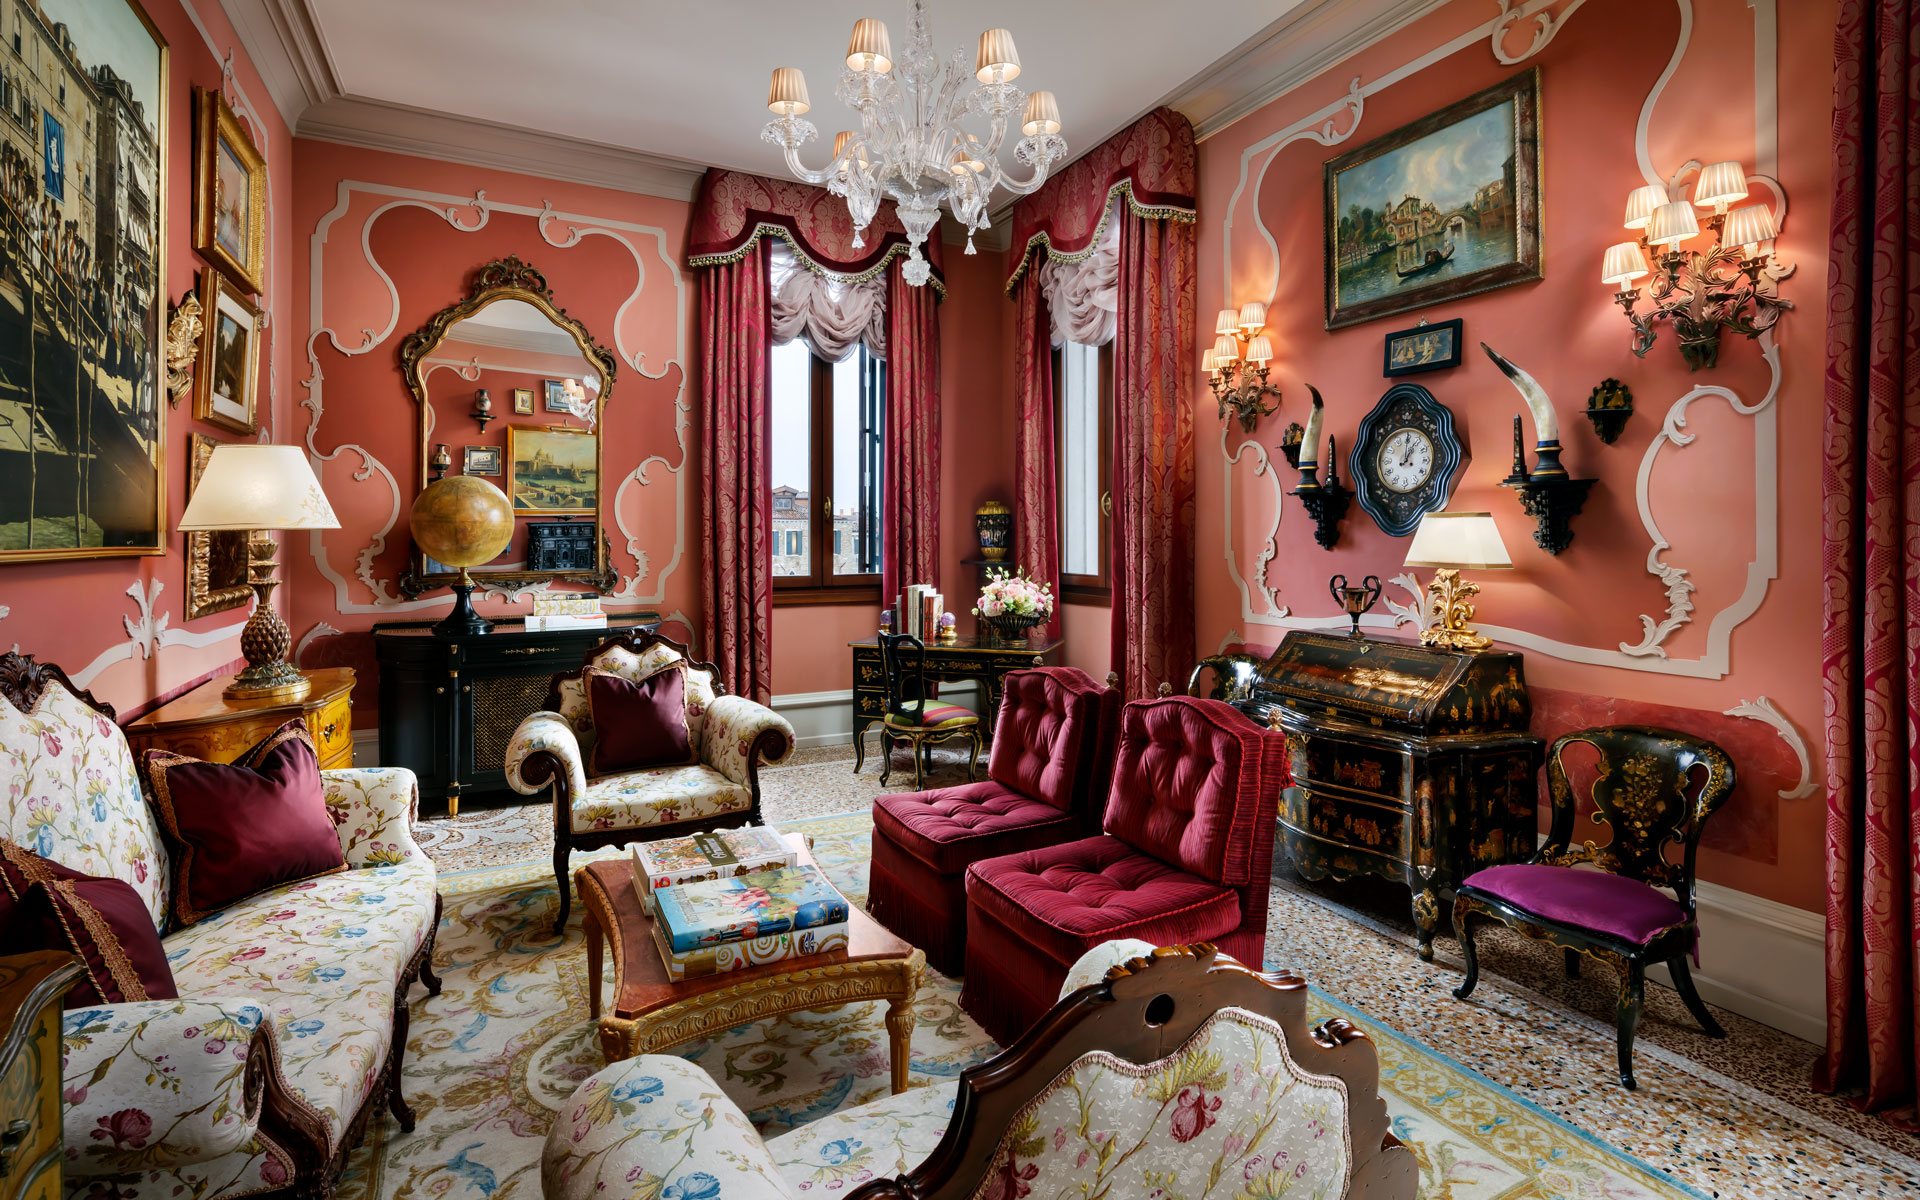 Step Into Coco's Apartment at the Chanel Culture Exhibit in Venice